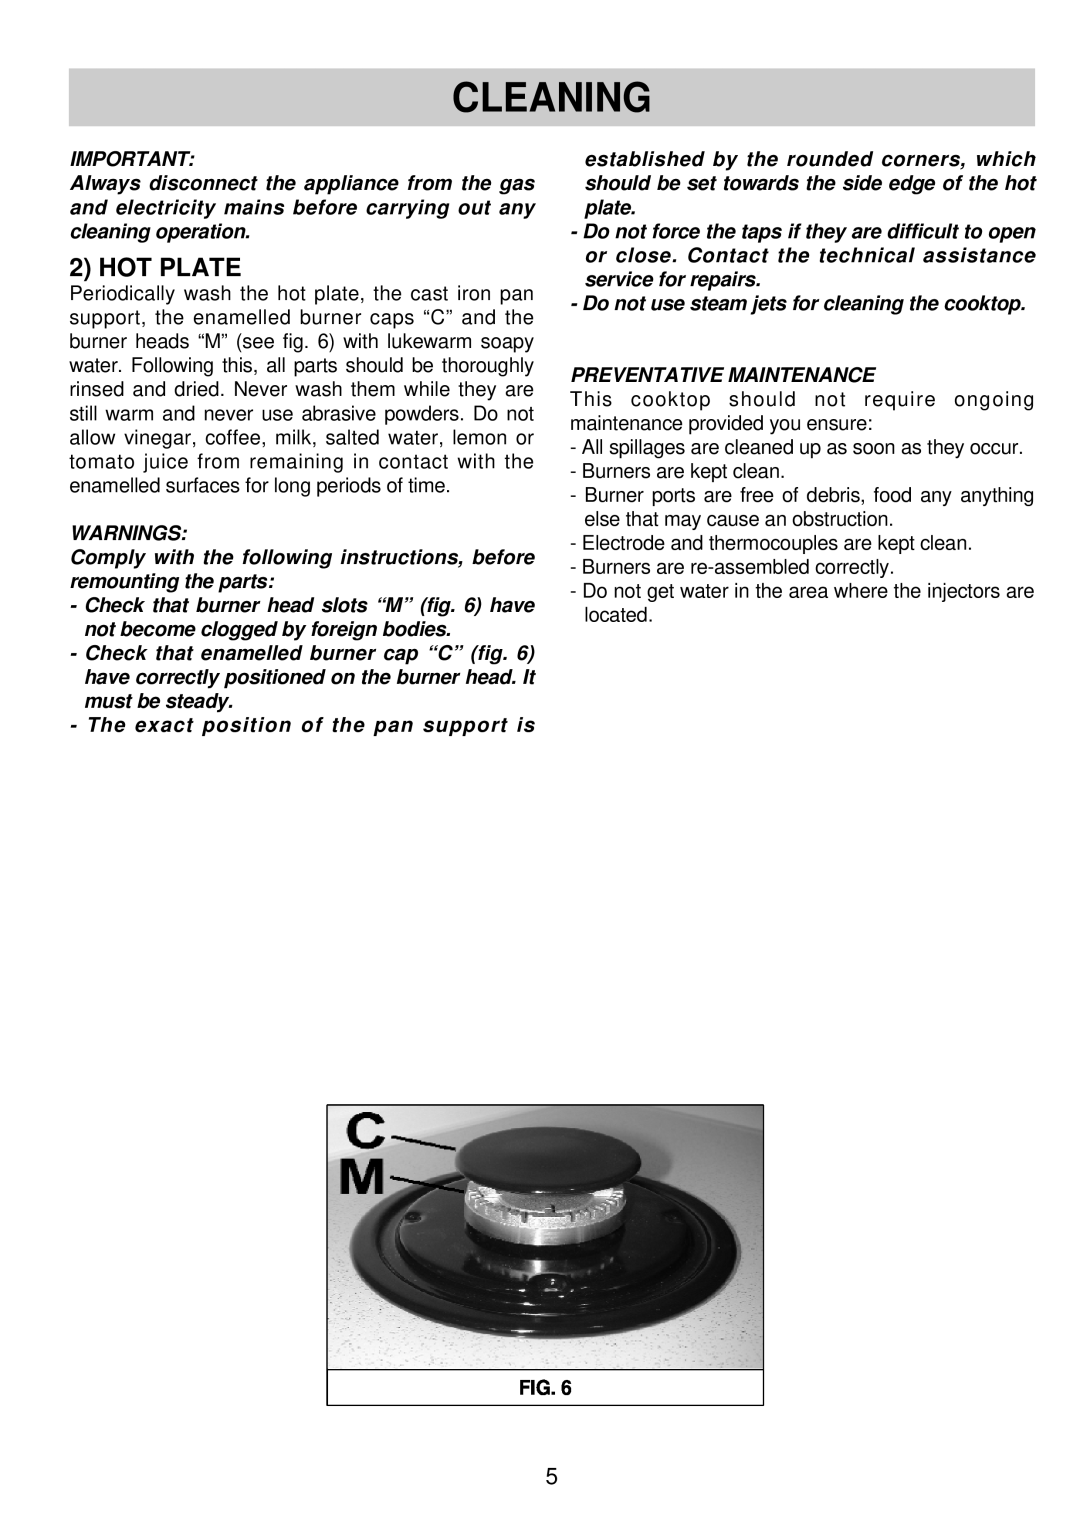 Blanco BCGC74 - BCGC52 Cleaning, Hot Plate, The exact position of the pan support is, Preventative Maintenance, Warnings 